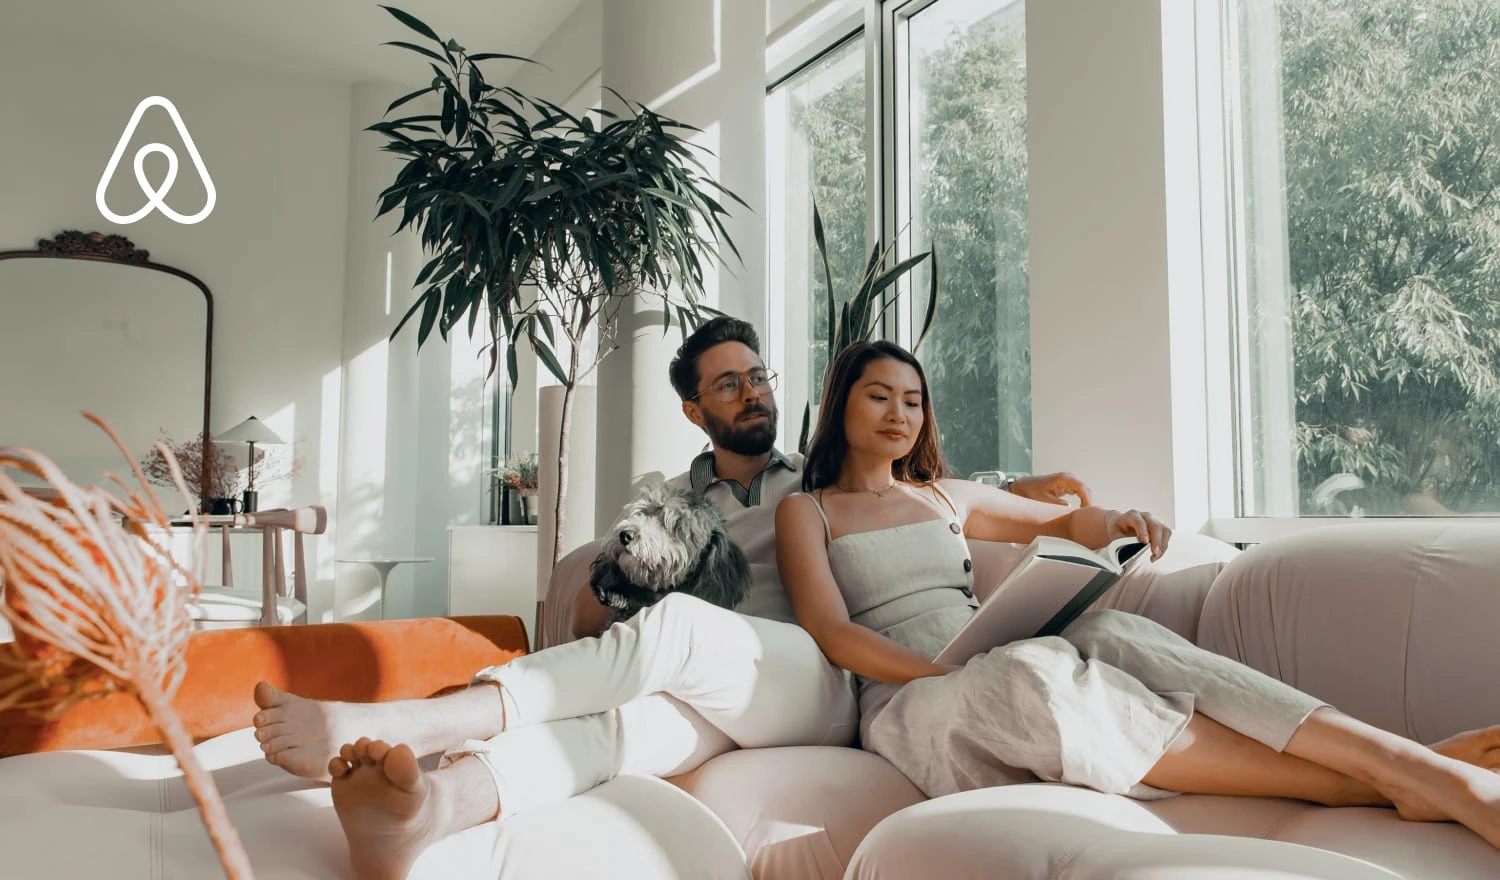 Couple sitting on couch